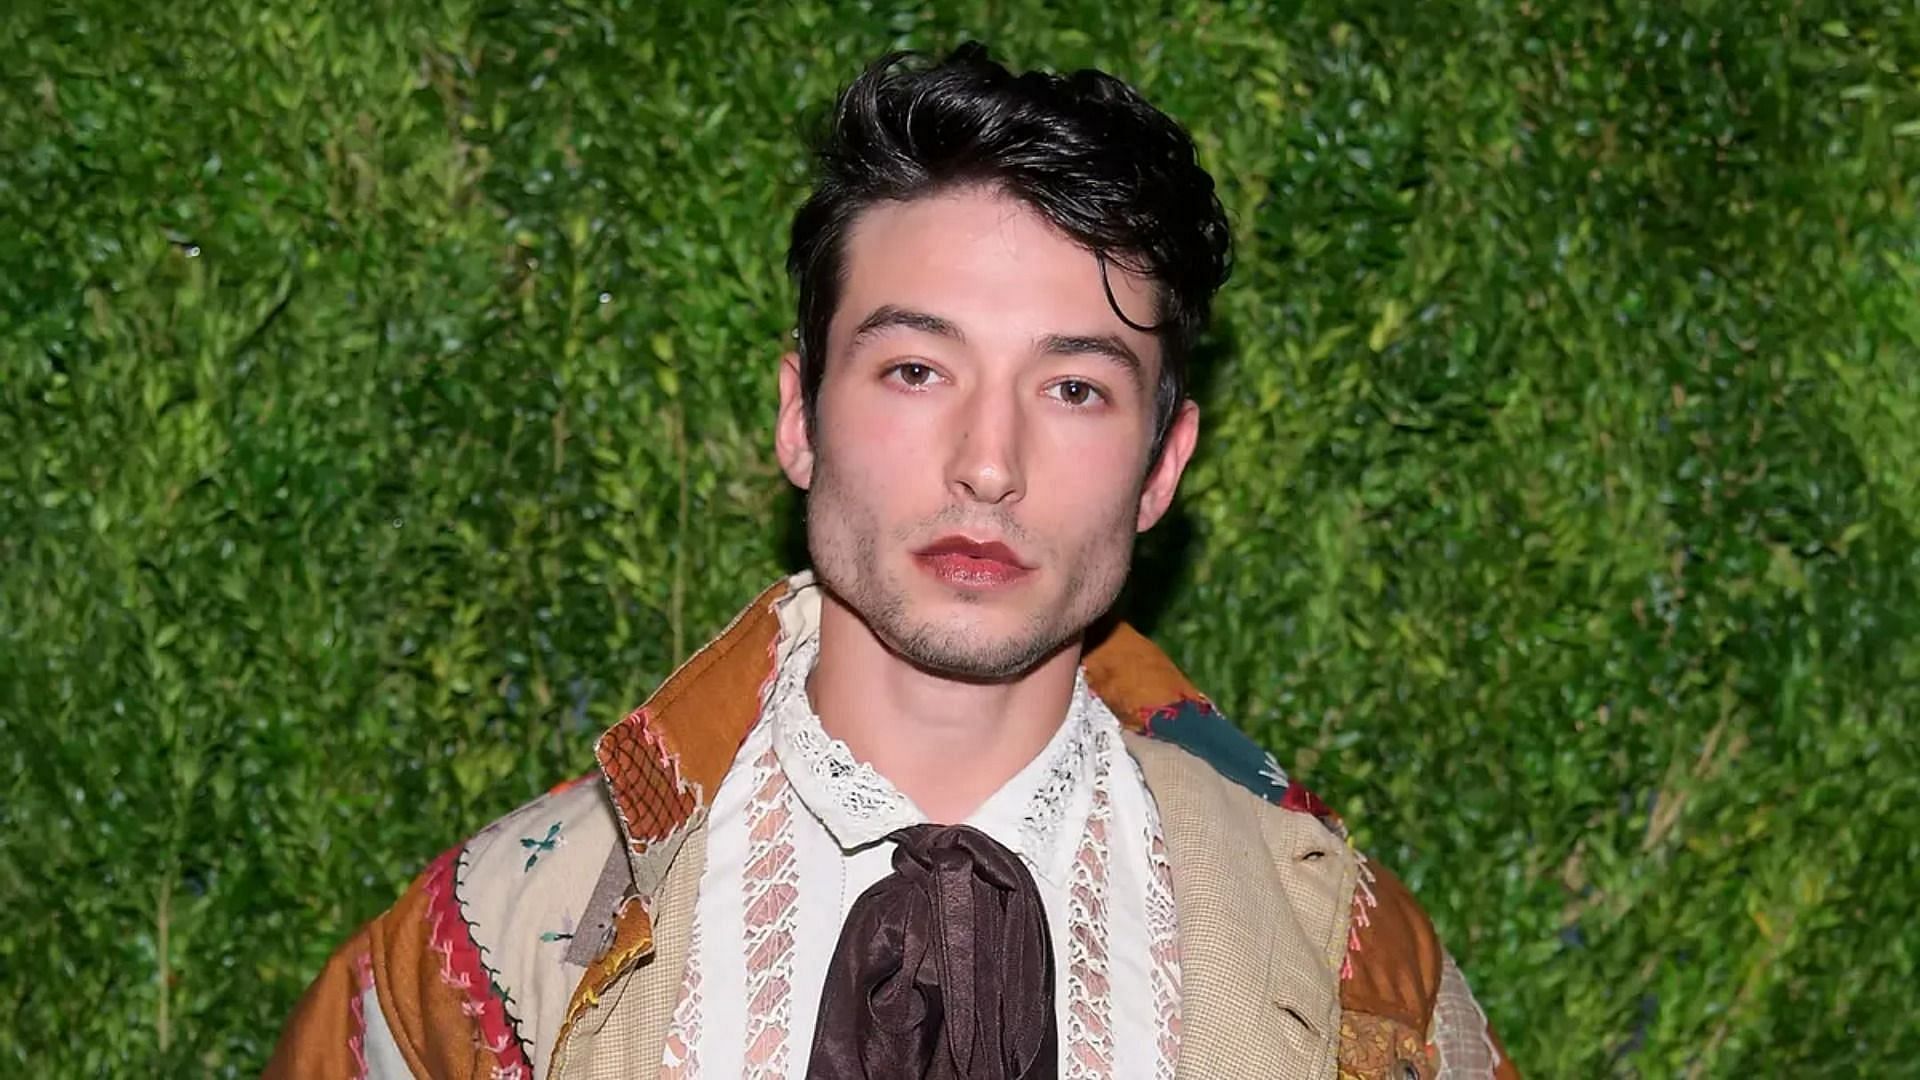 Ezra Miller threatens to attack young fan (Image via Getty Images)